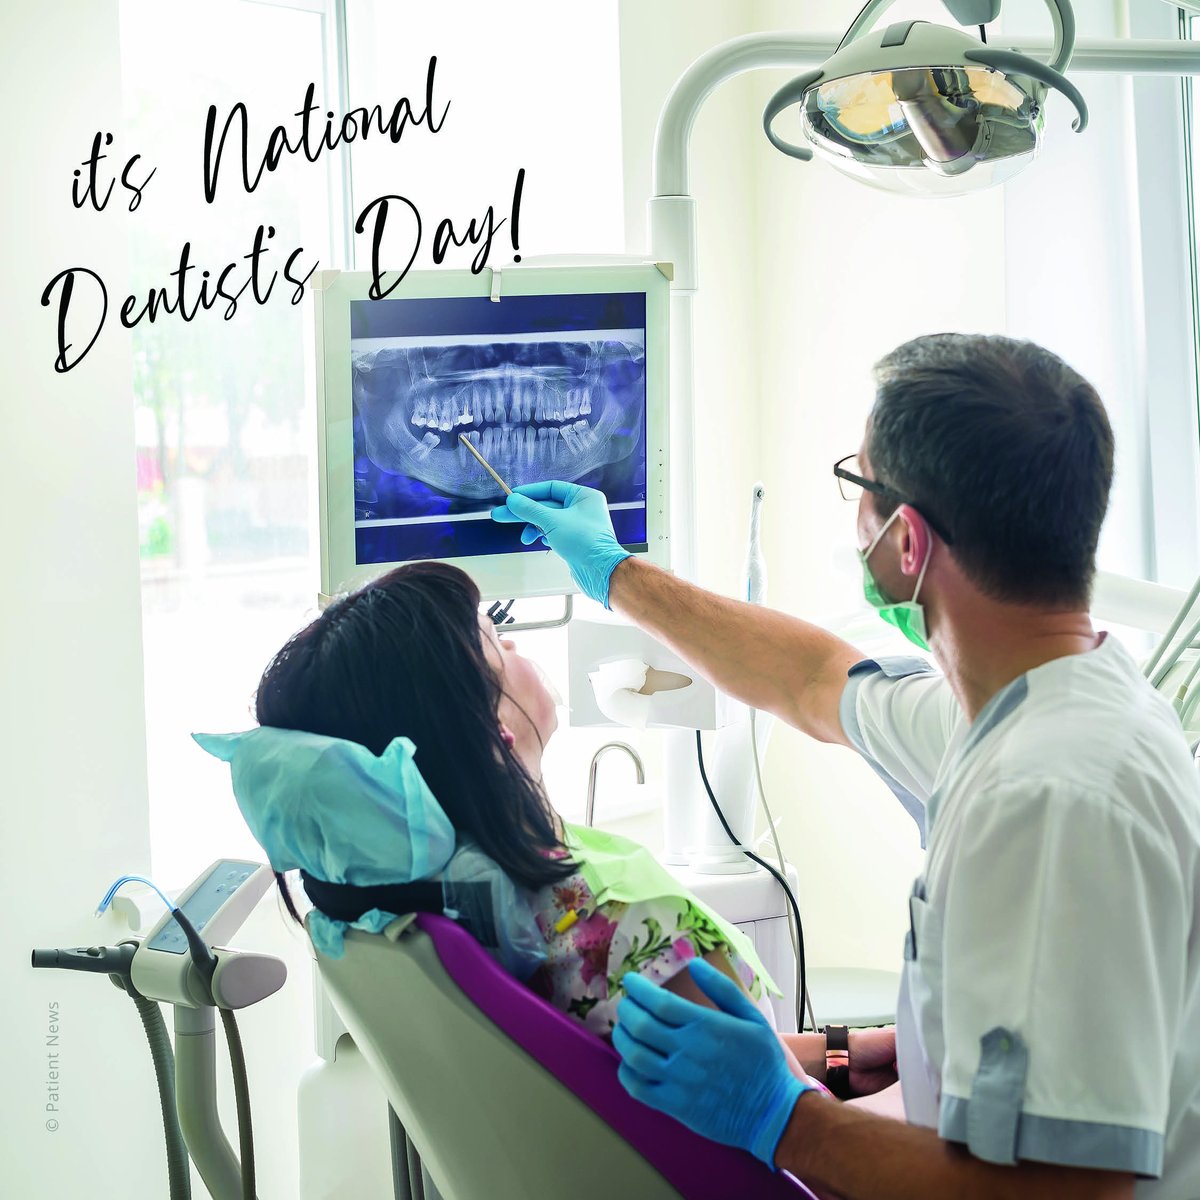 The best part of today is knowing we can help you smile your best smile, with optimum health and confidence. Thank you so much for your trust. You mean with world to us! #nationaldentistday #smile #WellandDentalCentre #WellandDentist #ontariodentist #familydentistinwelland https://t.co/hx3y61QNU0